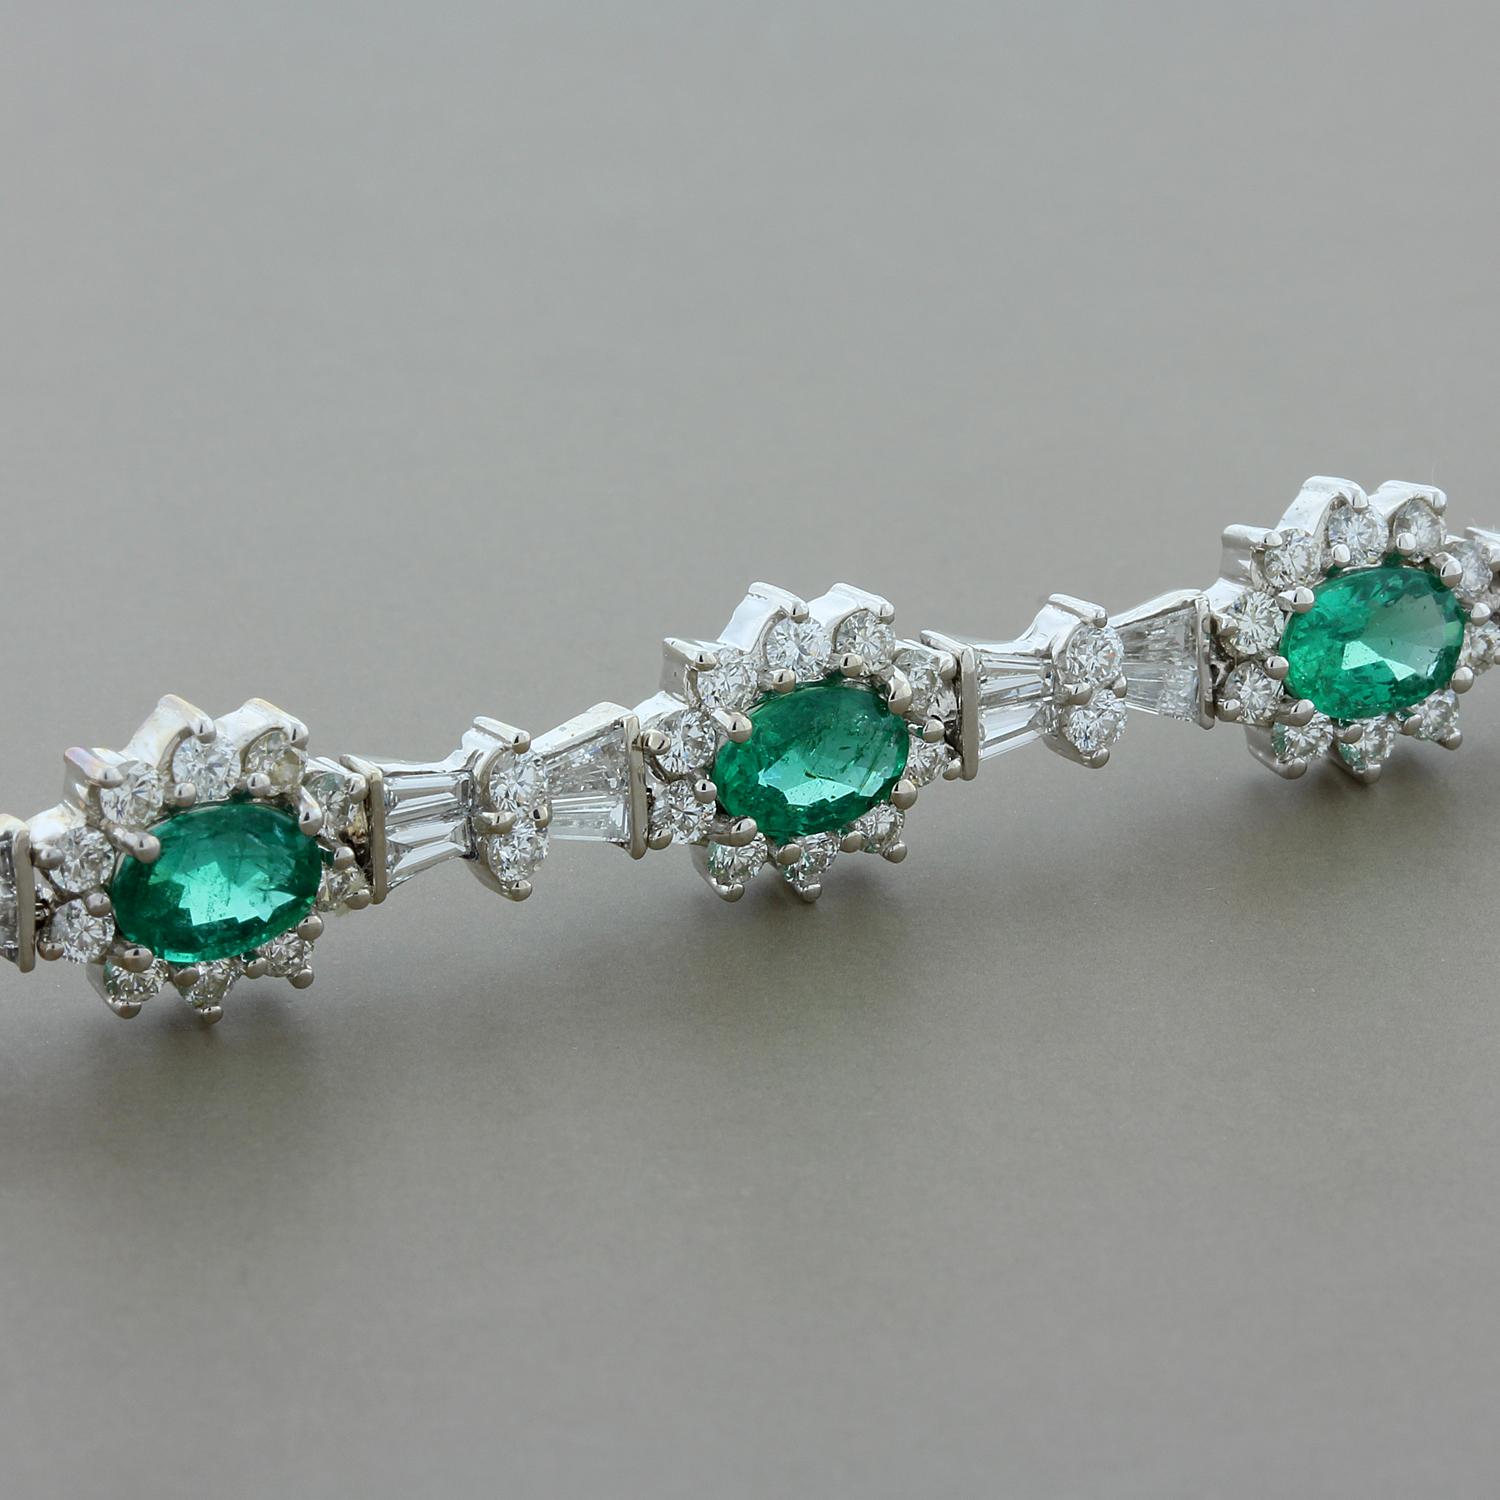 A feminine bracelet featuring 6.47 carats of deep green emeralds. The oval cut emeralds are haloed by 6.15 carats of round cut colorless VS quality diamonds with bows of baguette cut diamonds between each floral cluster. Set in 14K white gold with a